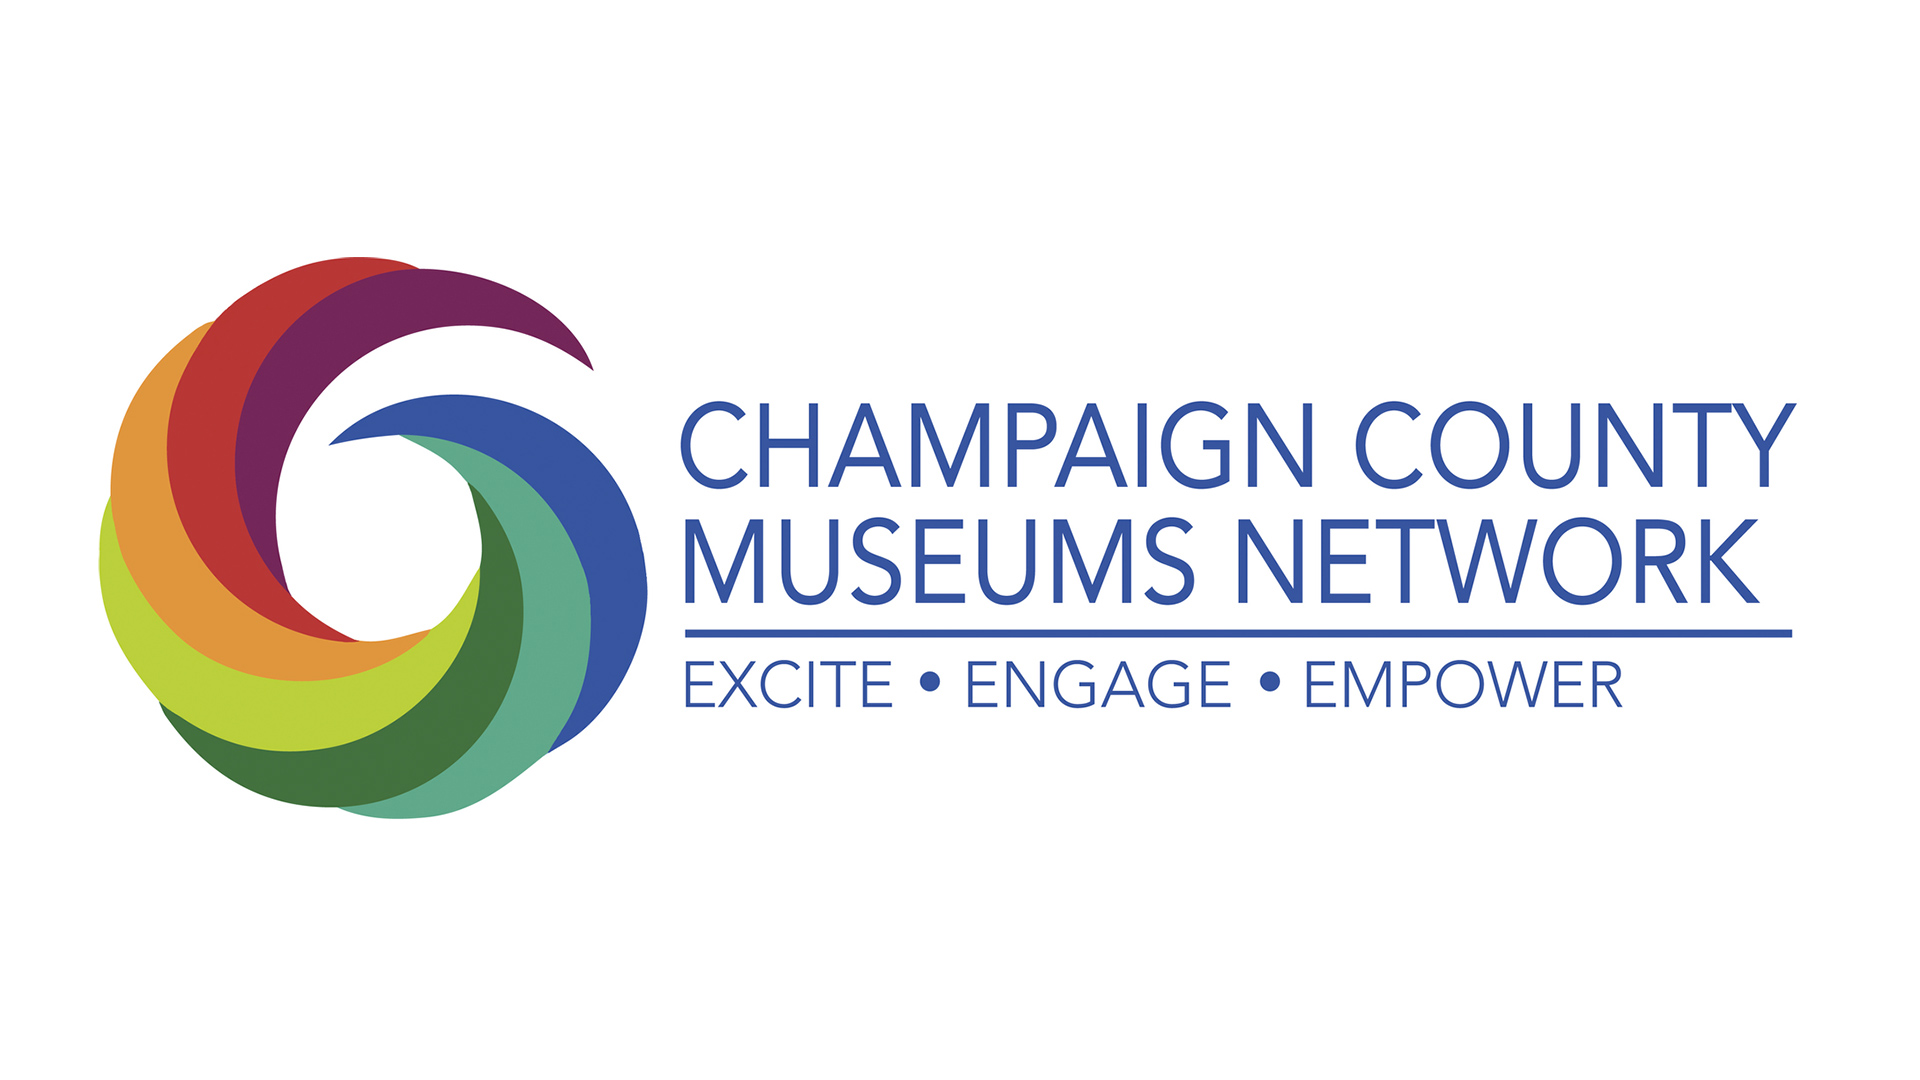 Champaign County Museum Network logo